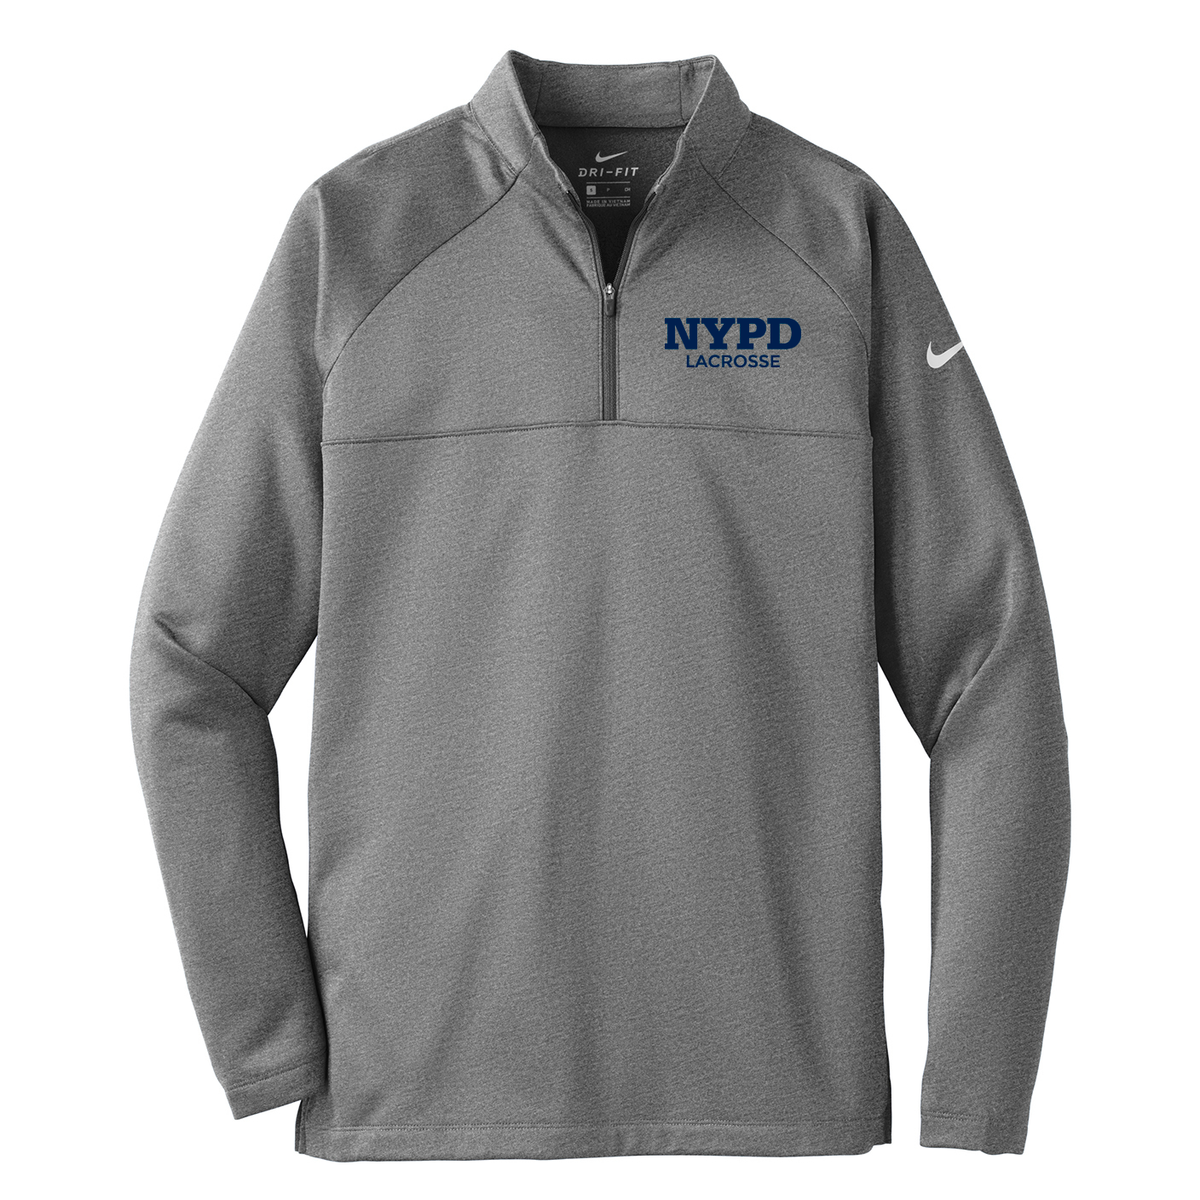 NYPD Lacrosse Nike Therma-FIT Fleece